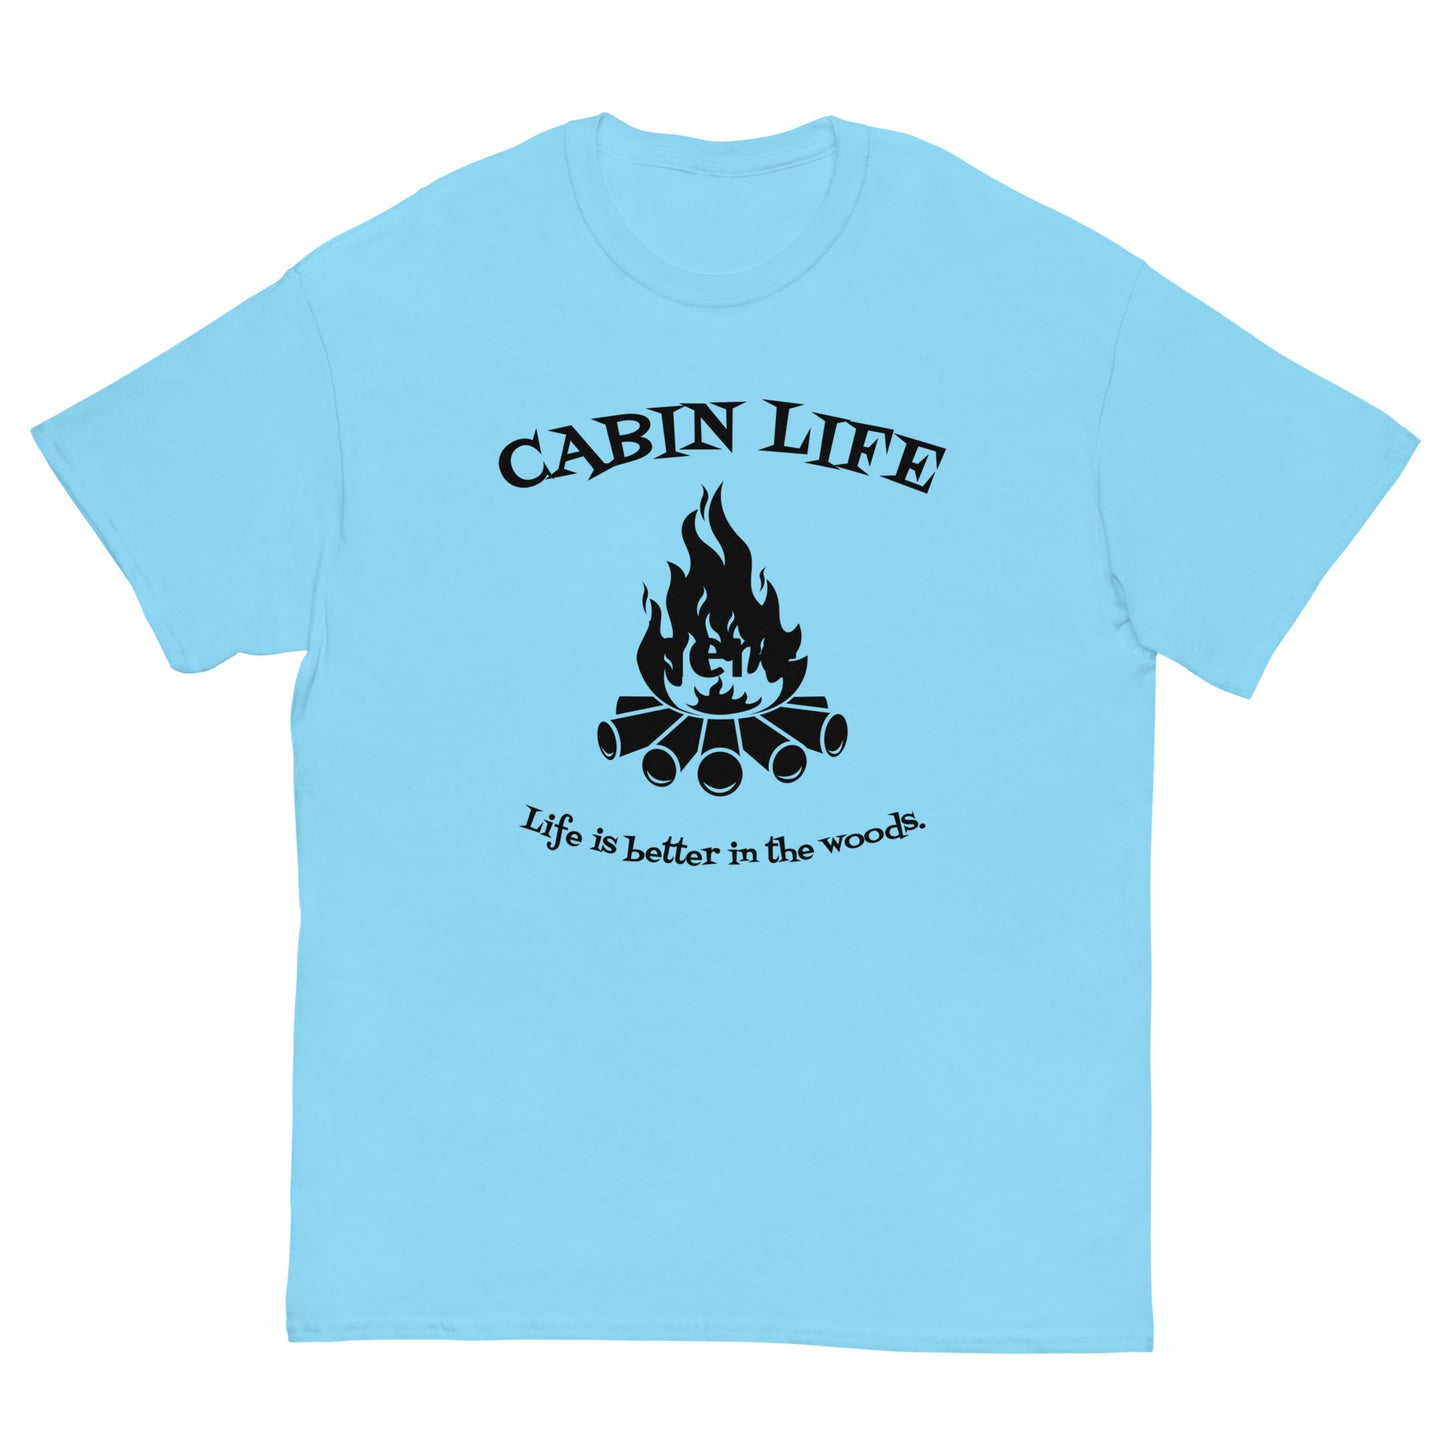 Cabin Life - Life is Better in the Woods classic tee